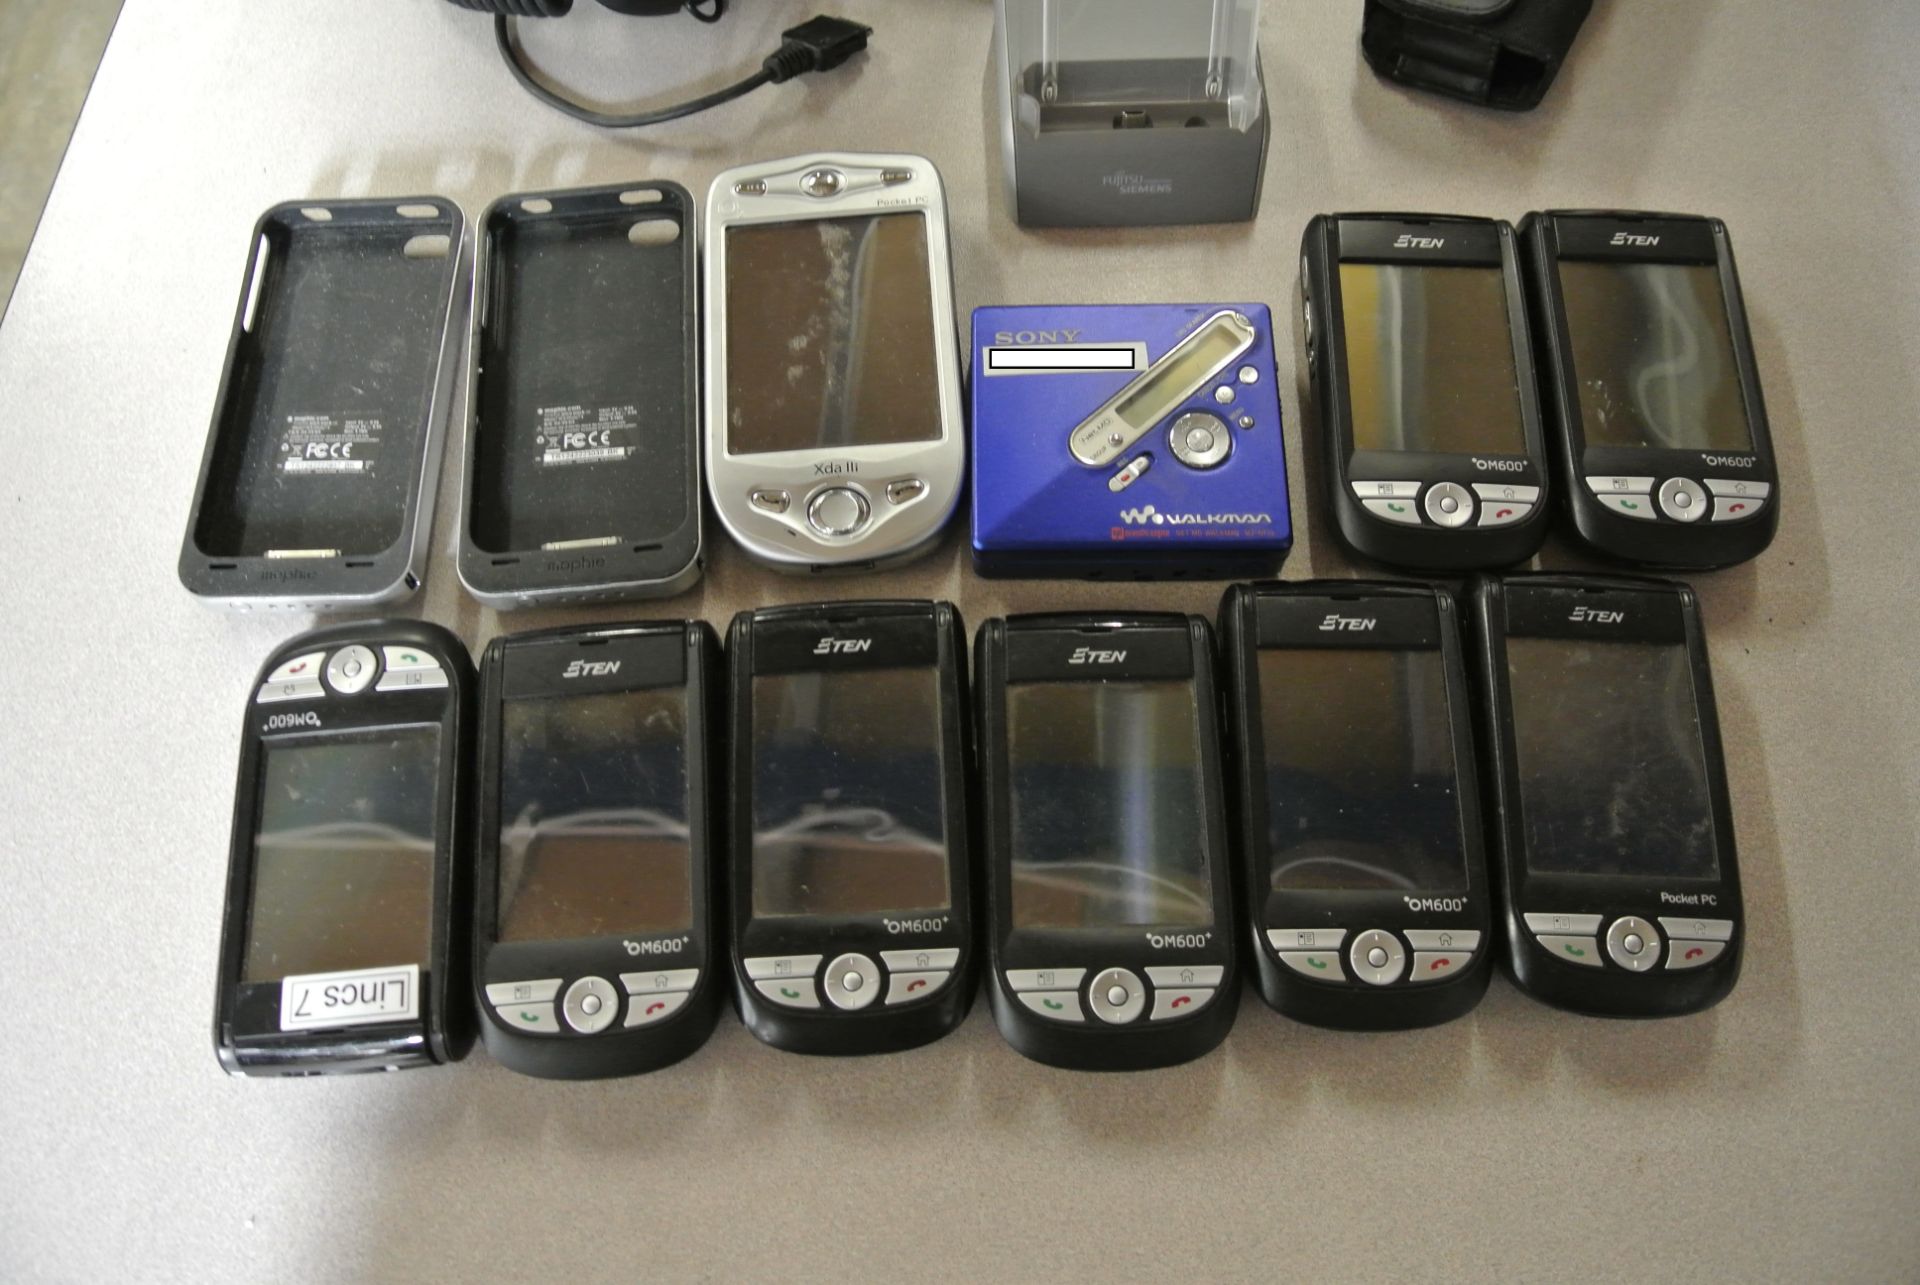 Large lot of multiple mobile phones and accessories, including - 1 x ETEN Pocket PC + 5 x ETEN OM600 - Image 3 of 7